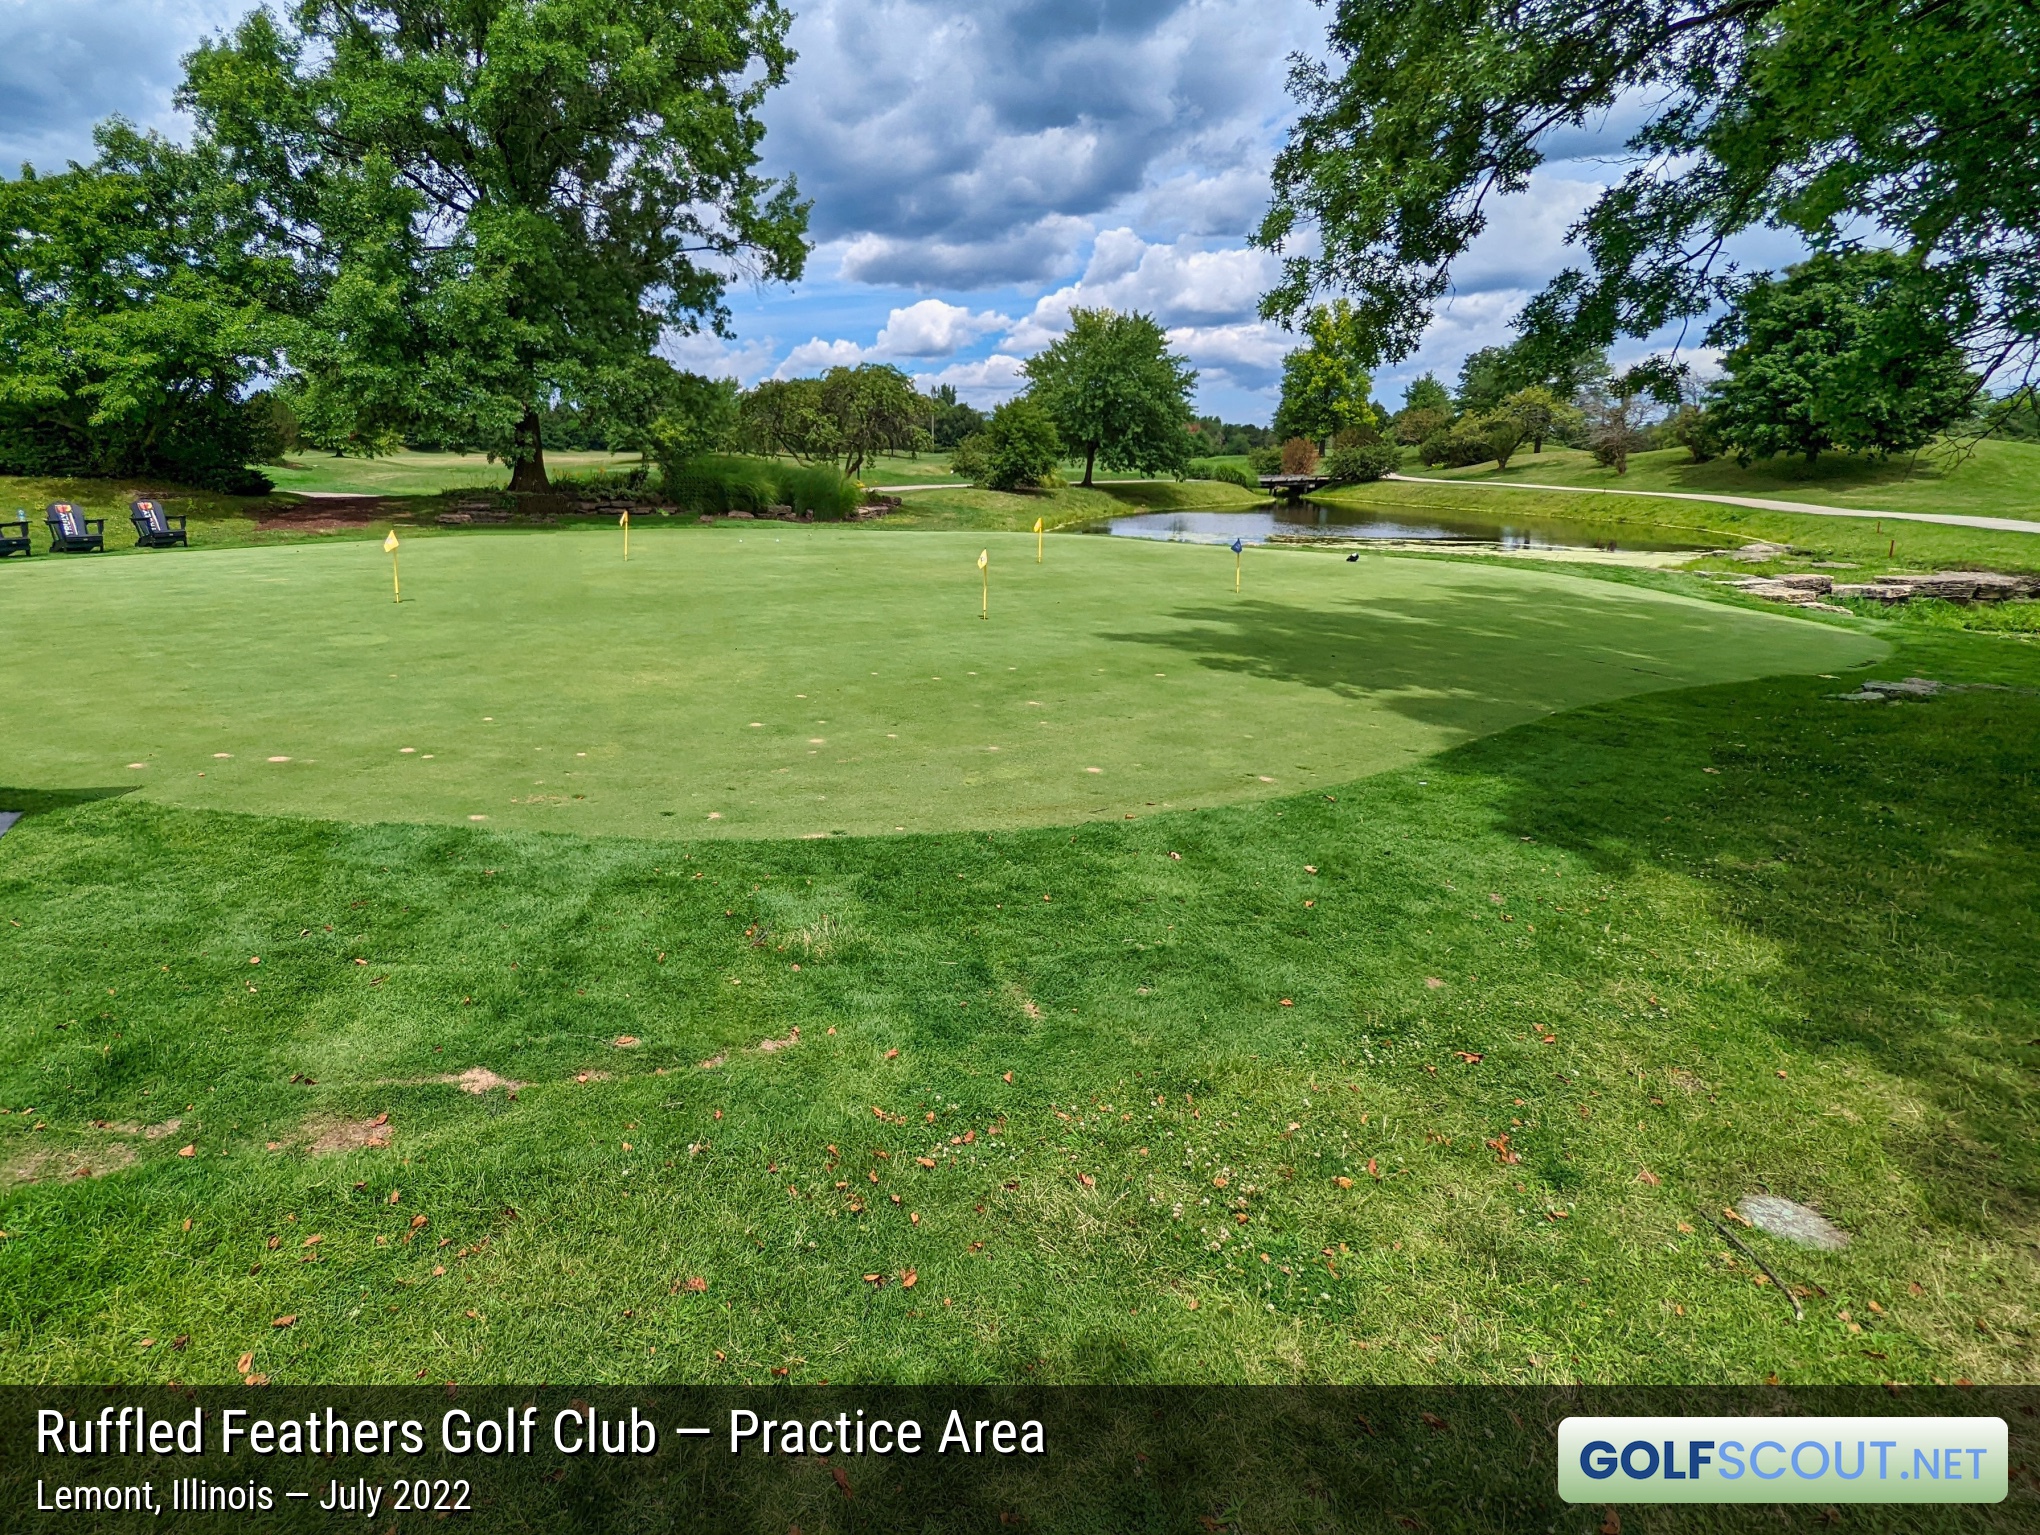 Photo of the practice area at Ruffled Feathers Golf Club in Lemont, Illinois. 